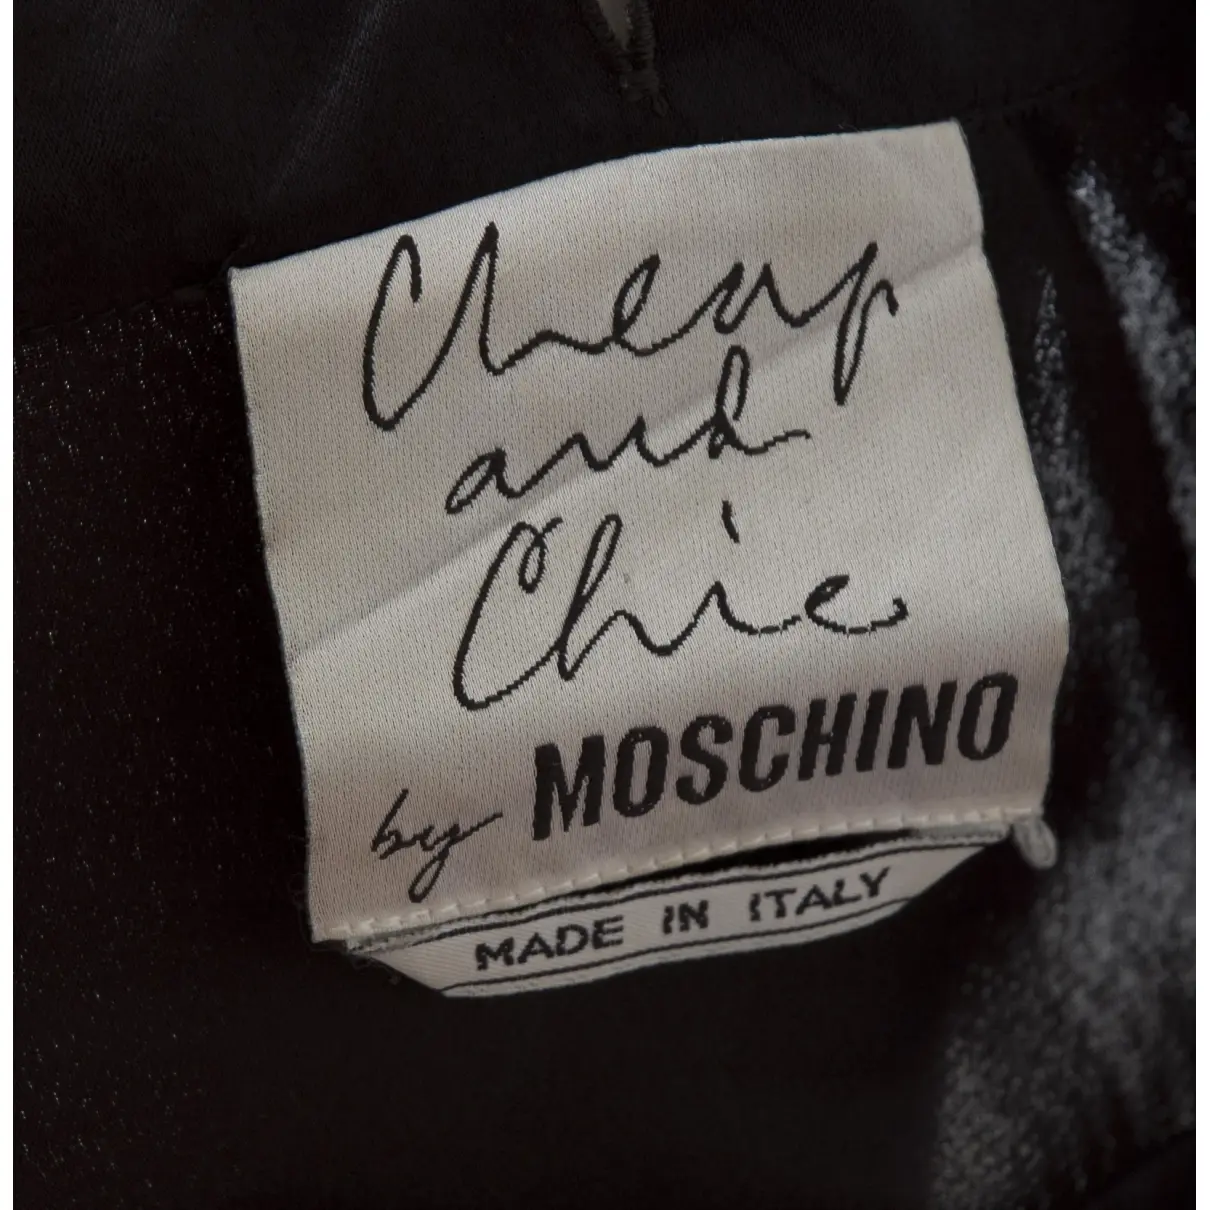 Buy Moschino Cheap And Chic Mini dress online - Vintage